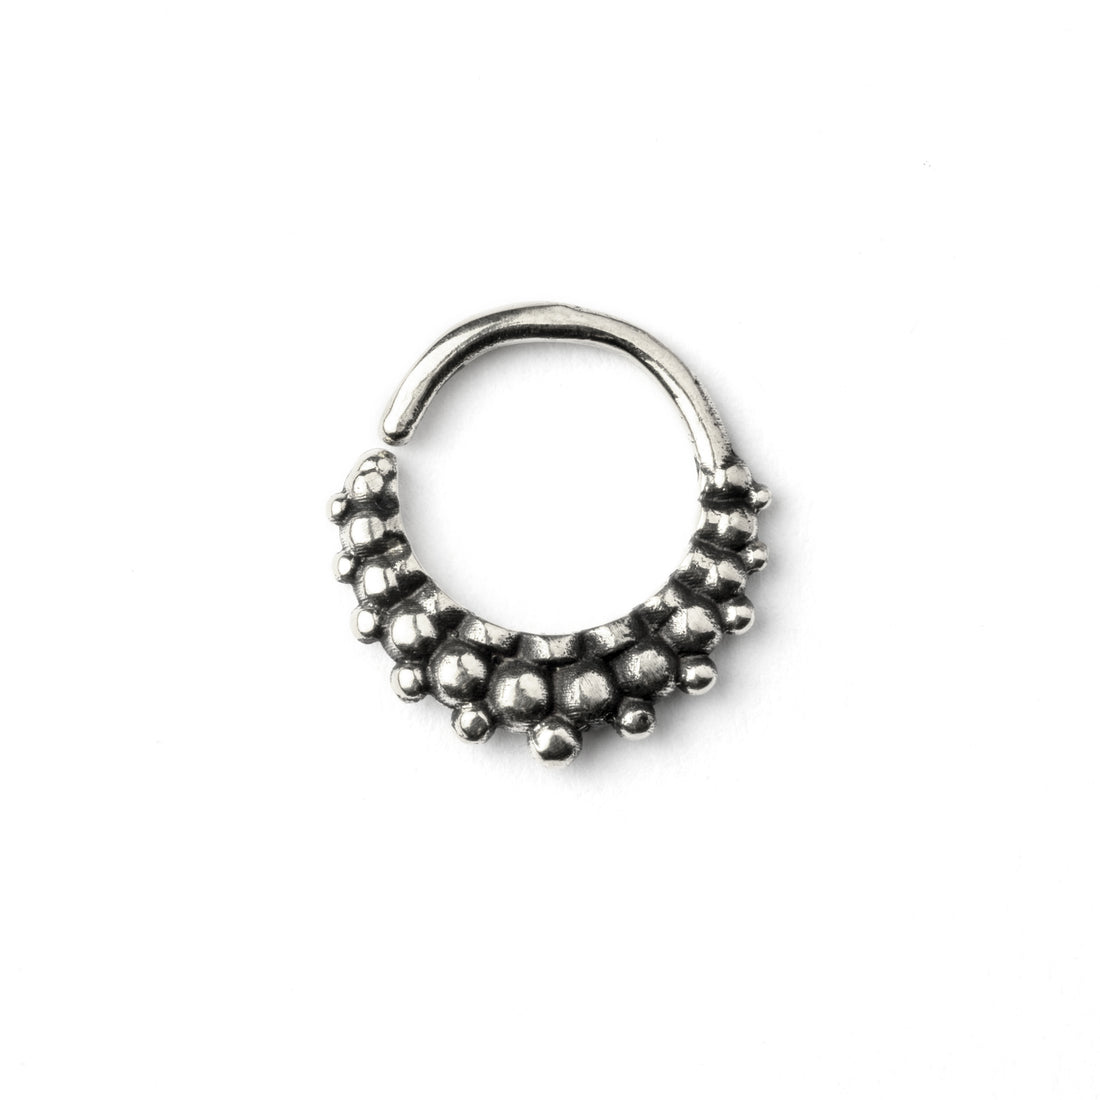 Rajee Silver Septum Ring frontal view